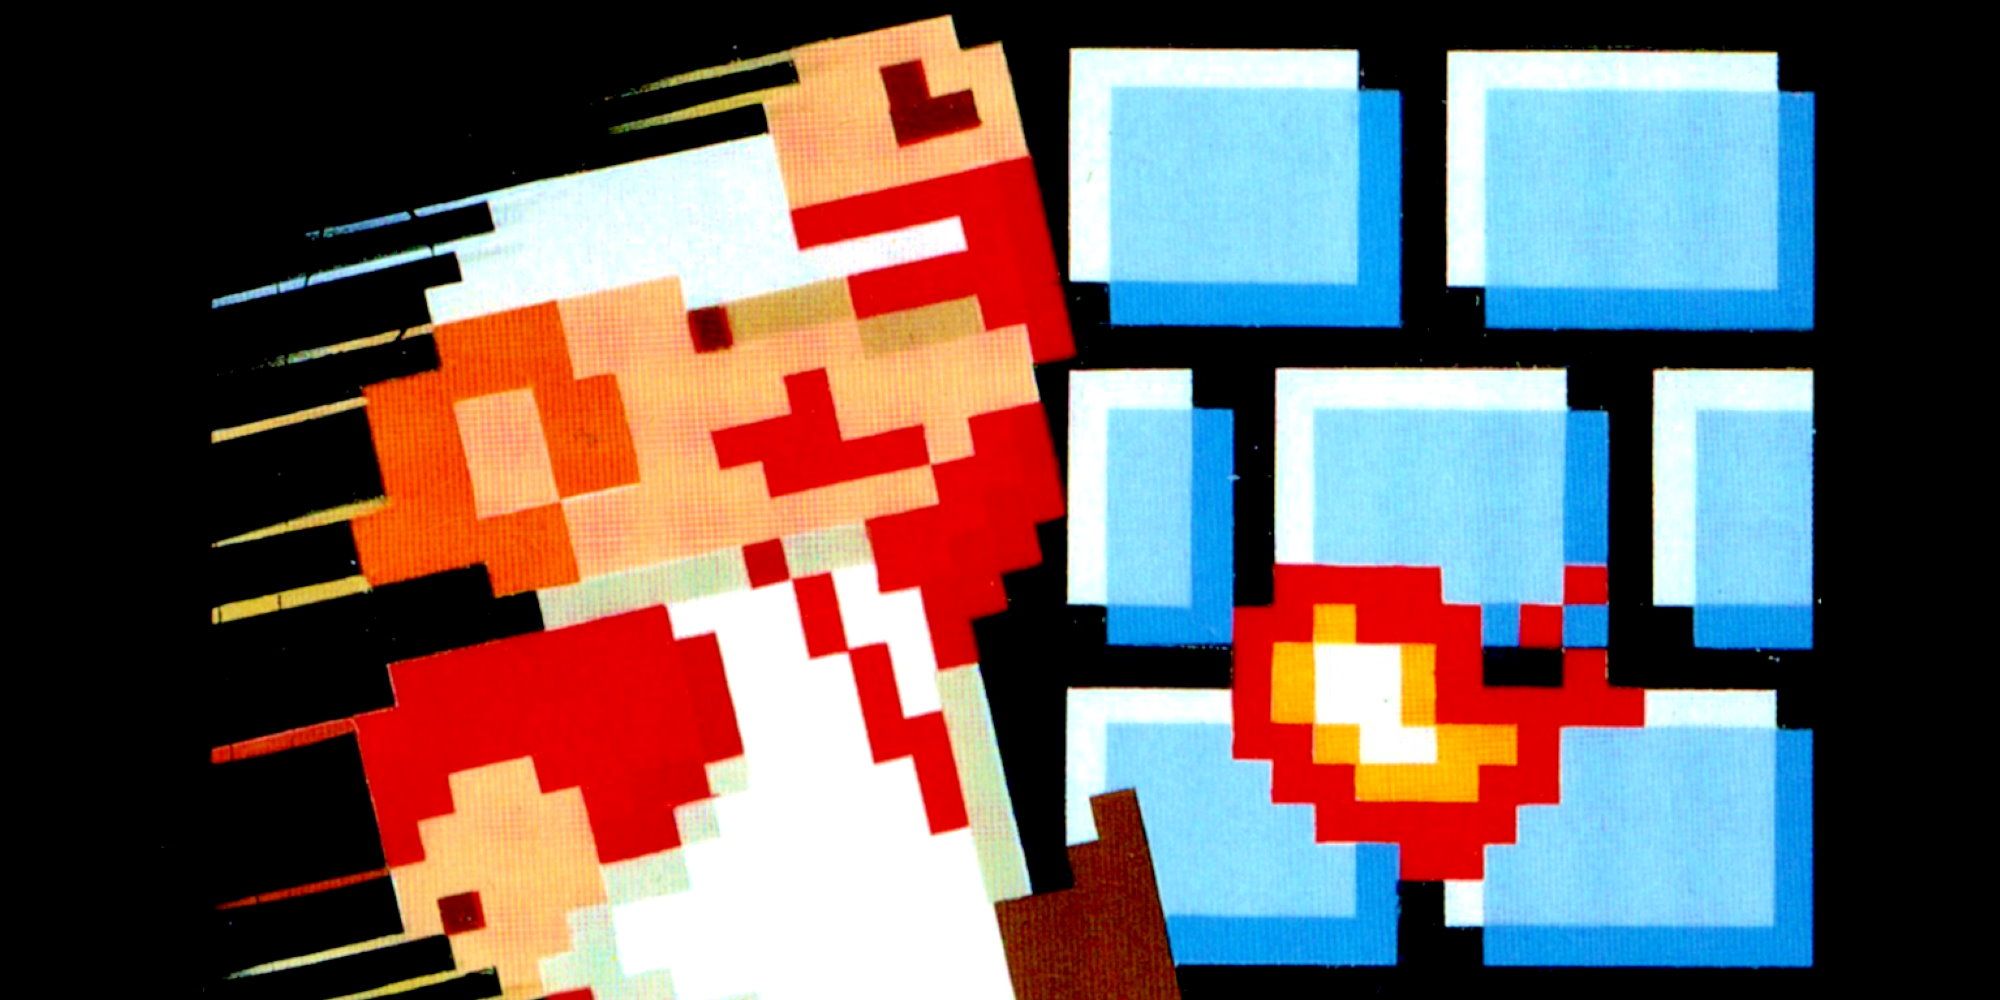 The cover art from Super Mario Bros, showing Fire Flower Mario jumping and shooting a fireball